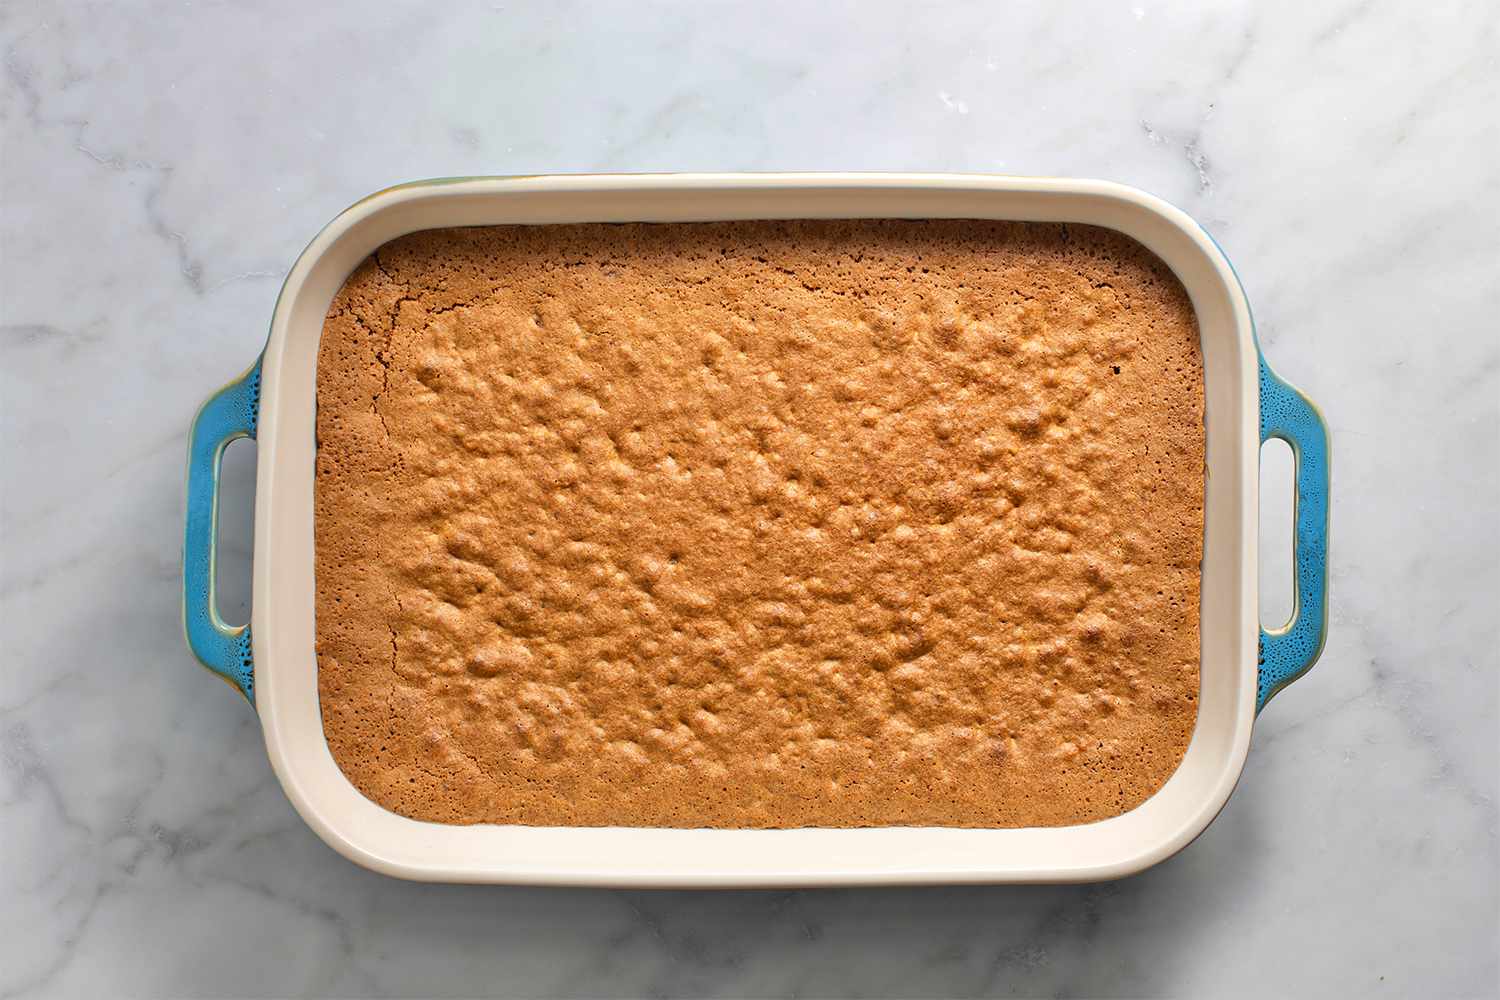 Baked cake in a baking dish 